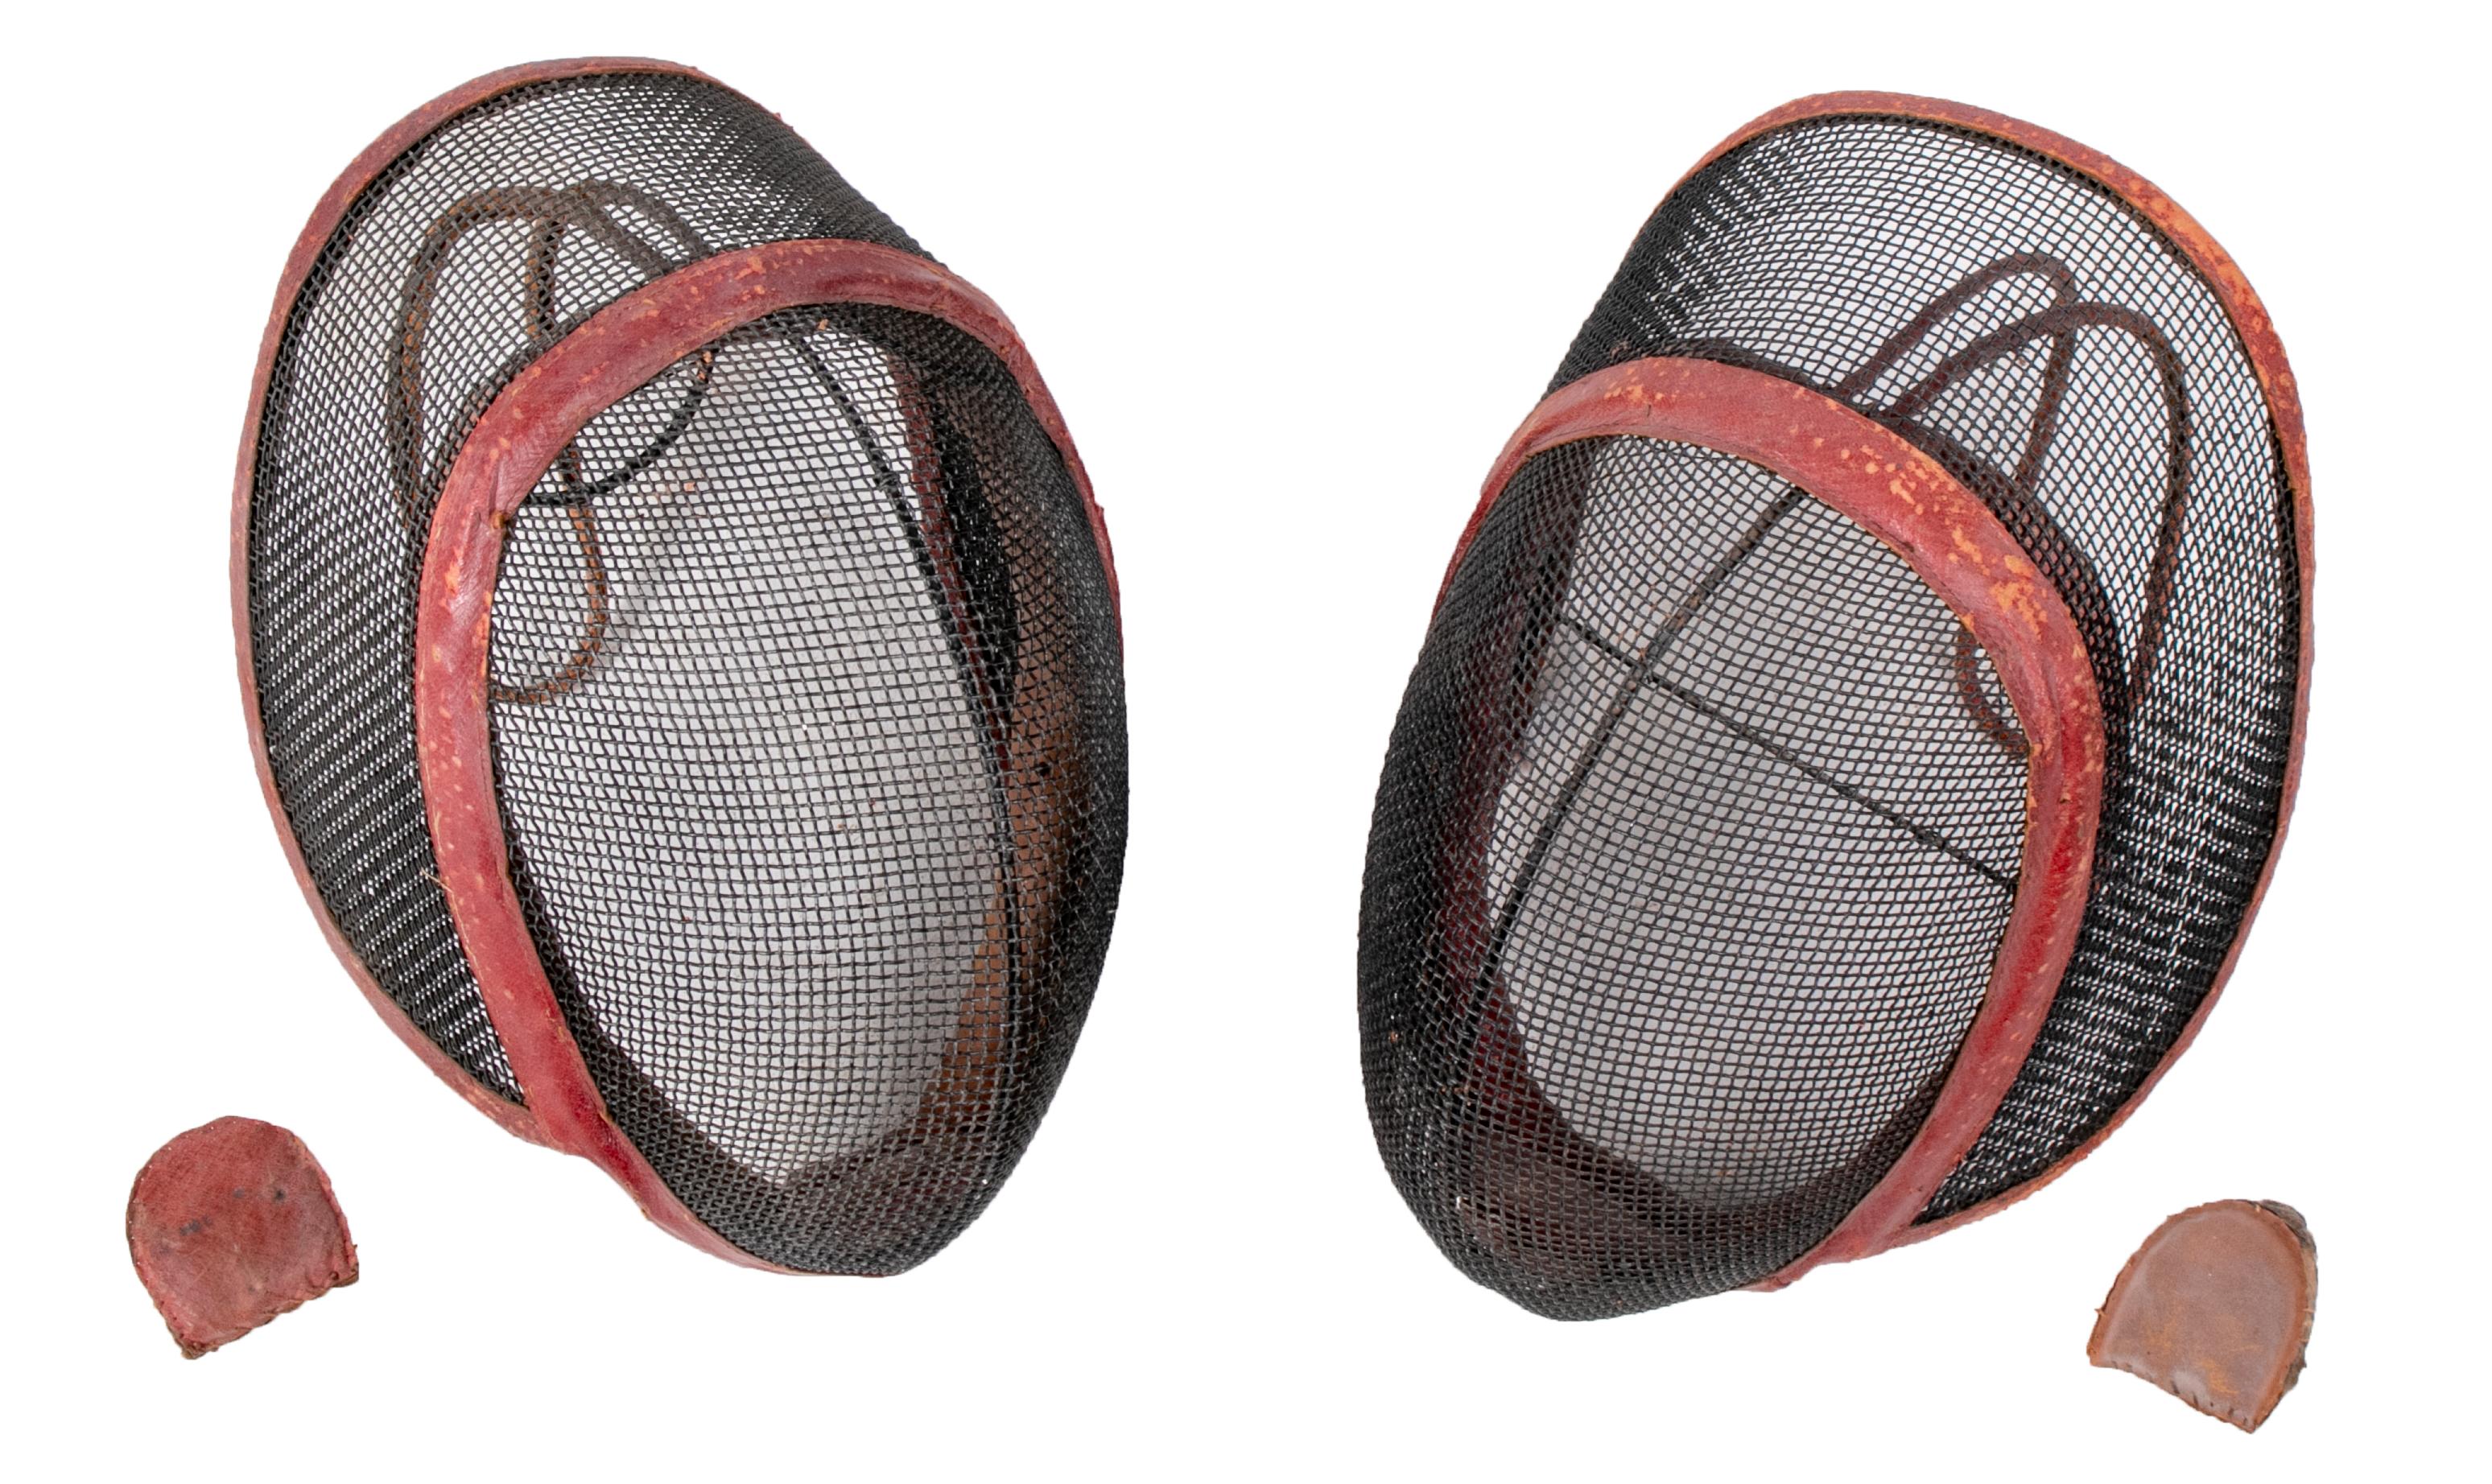 19th century pair of antique iron and leather fencing mesh mask.